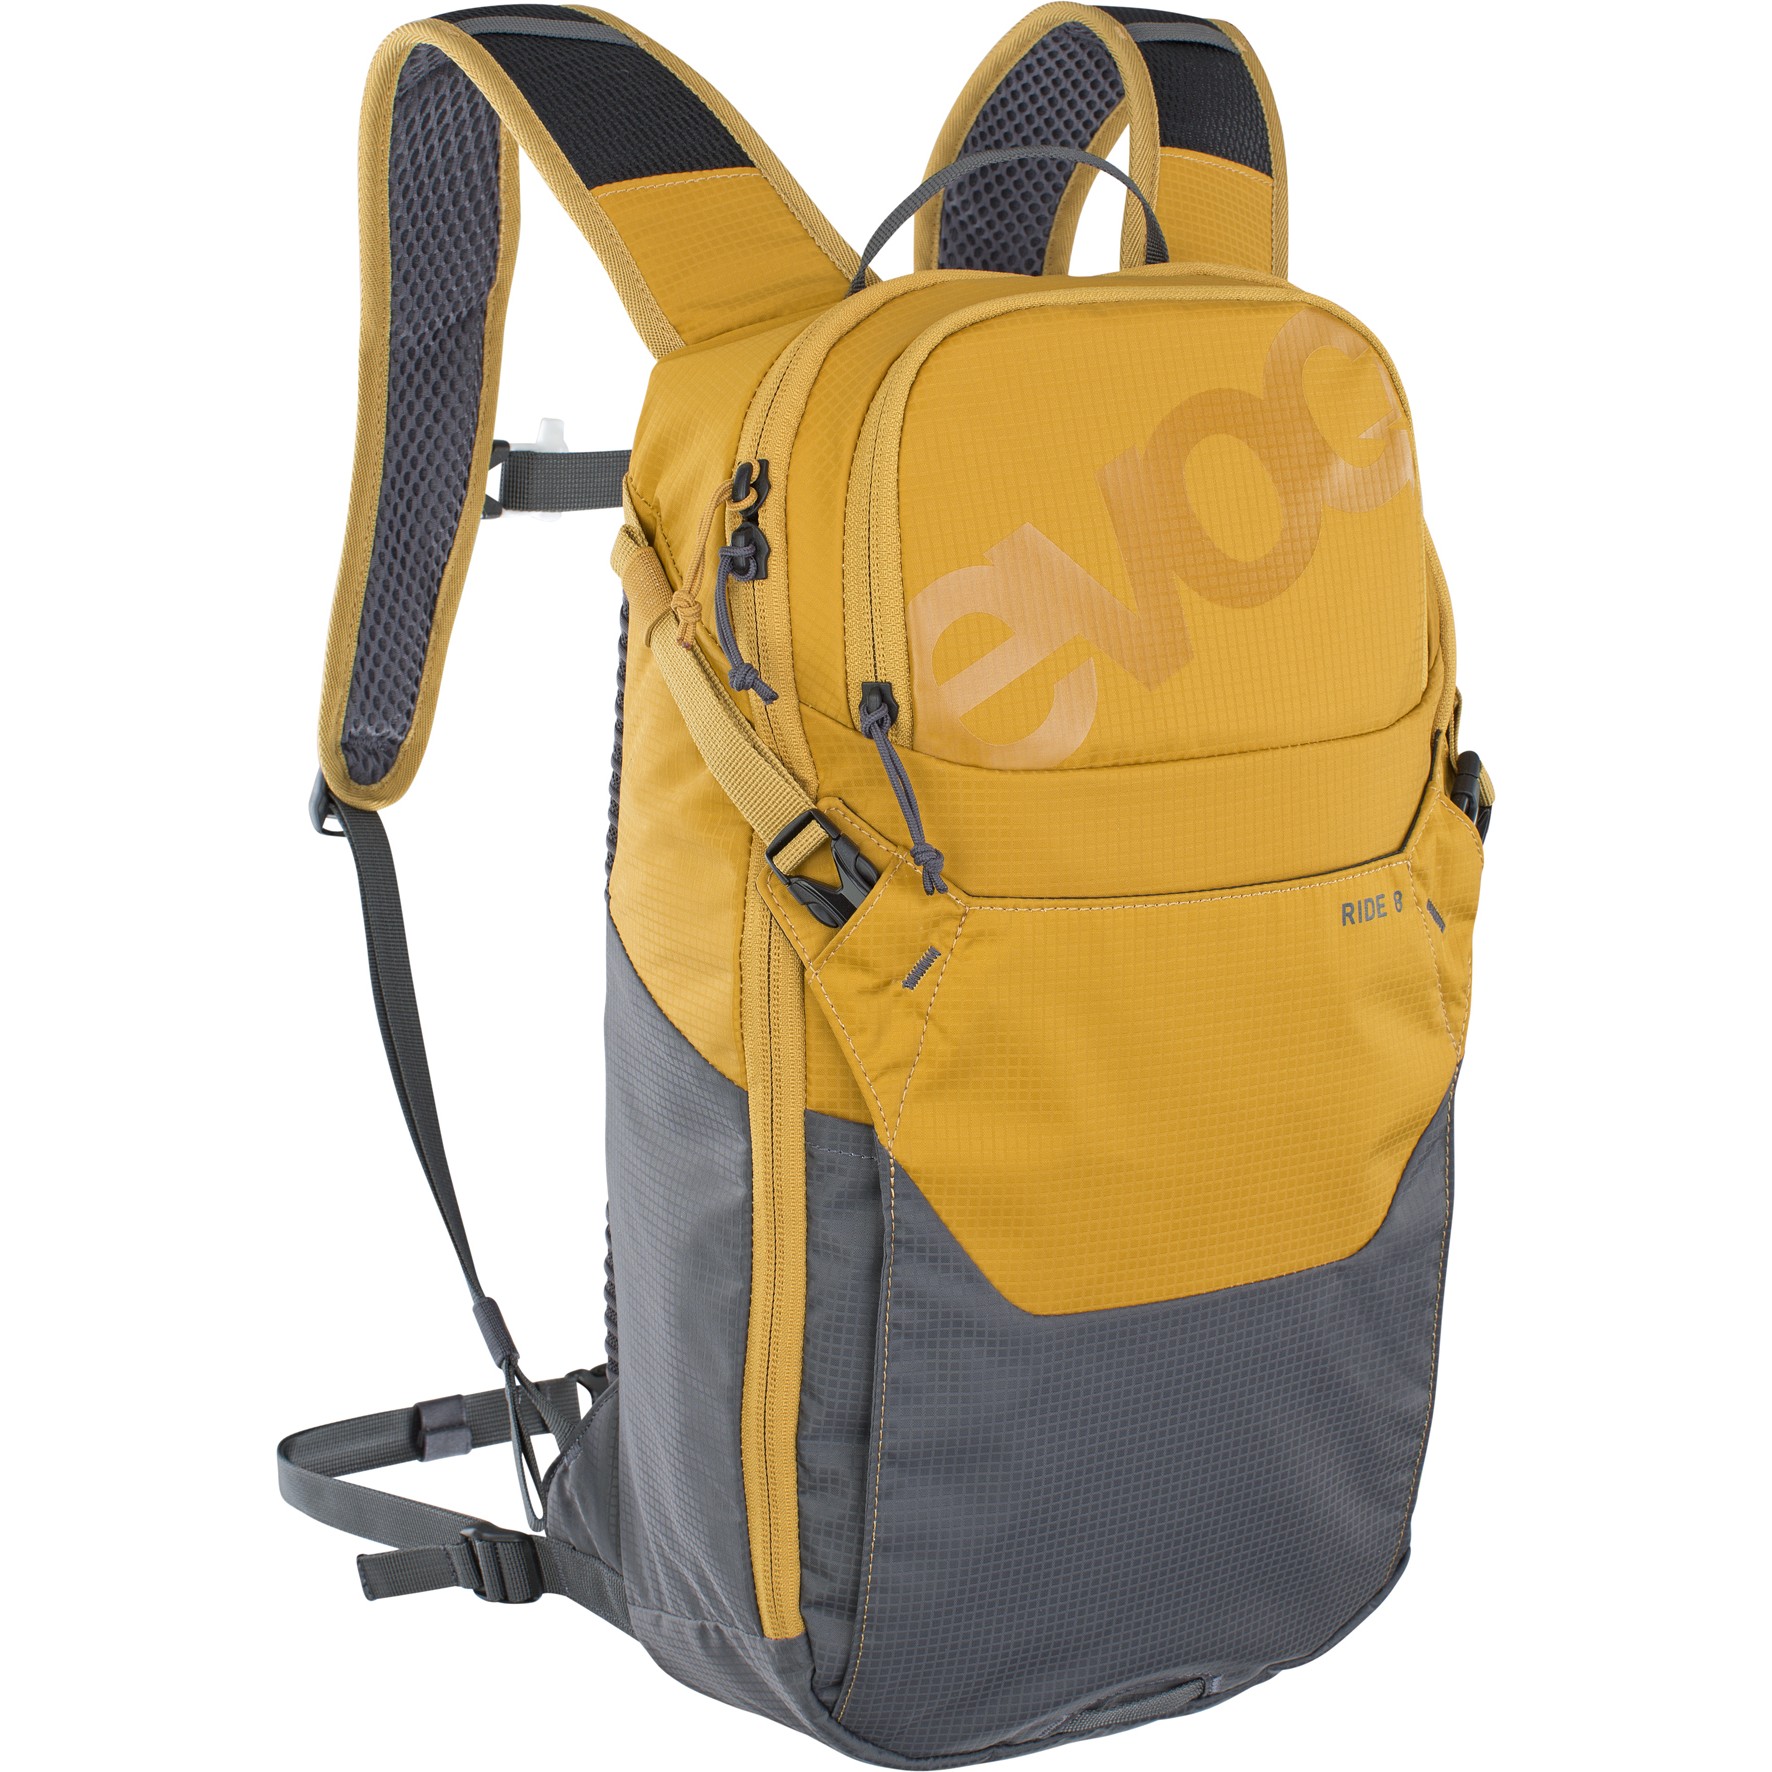 Picture of EVOC Ride 8L Backpack - Loam/Carbon Grey